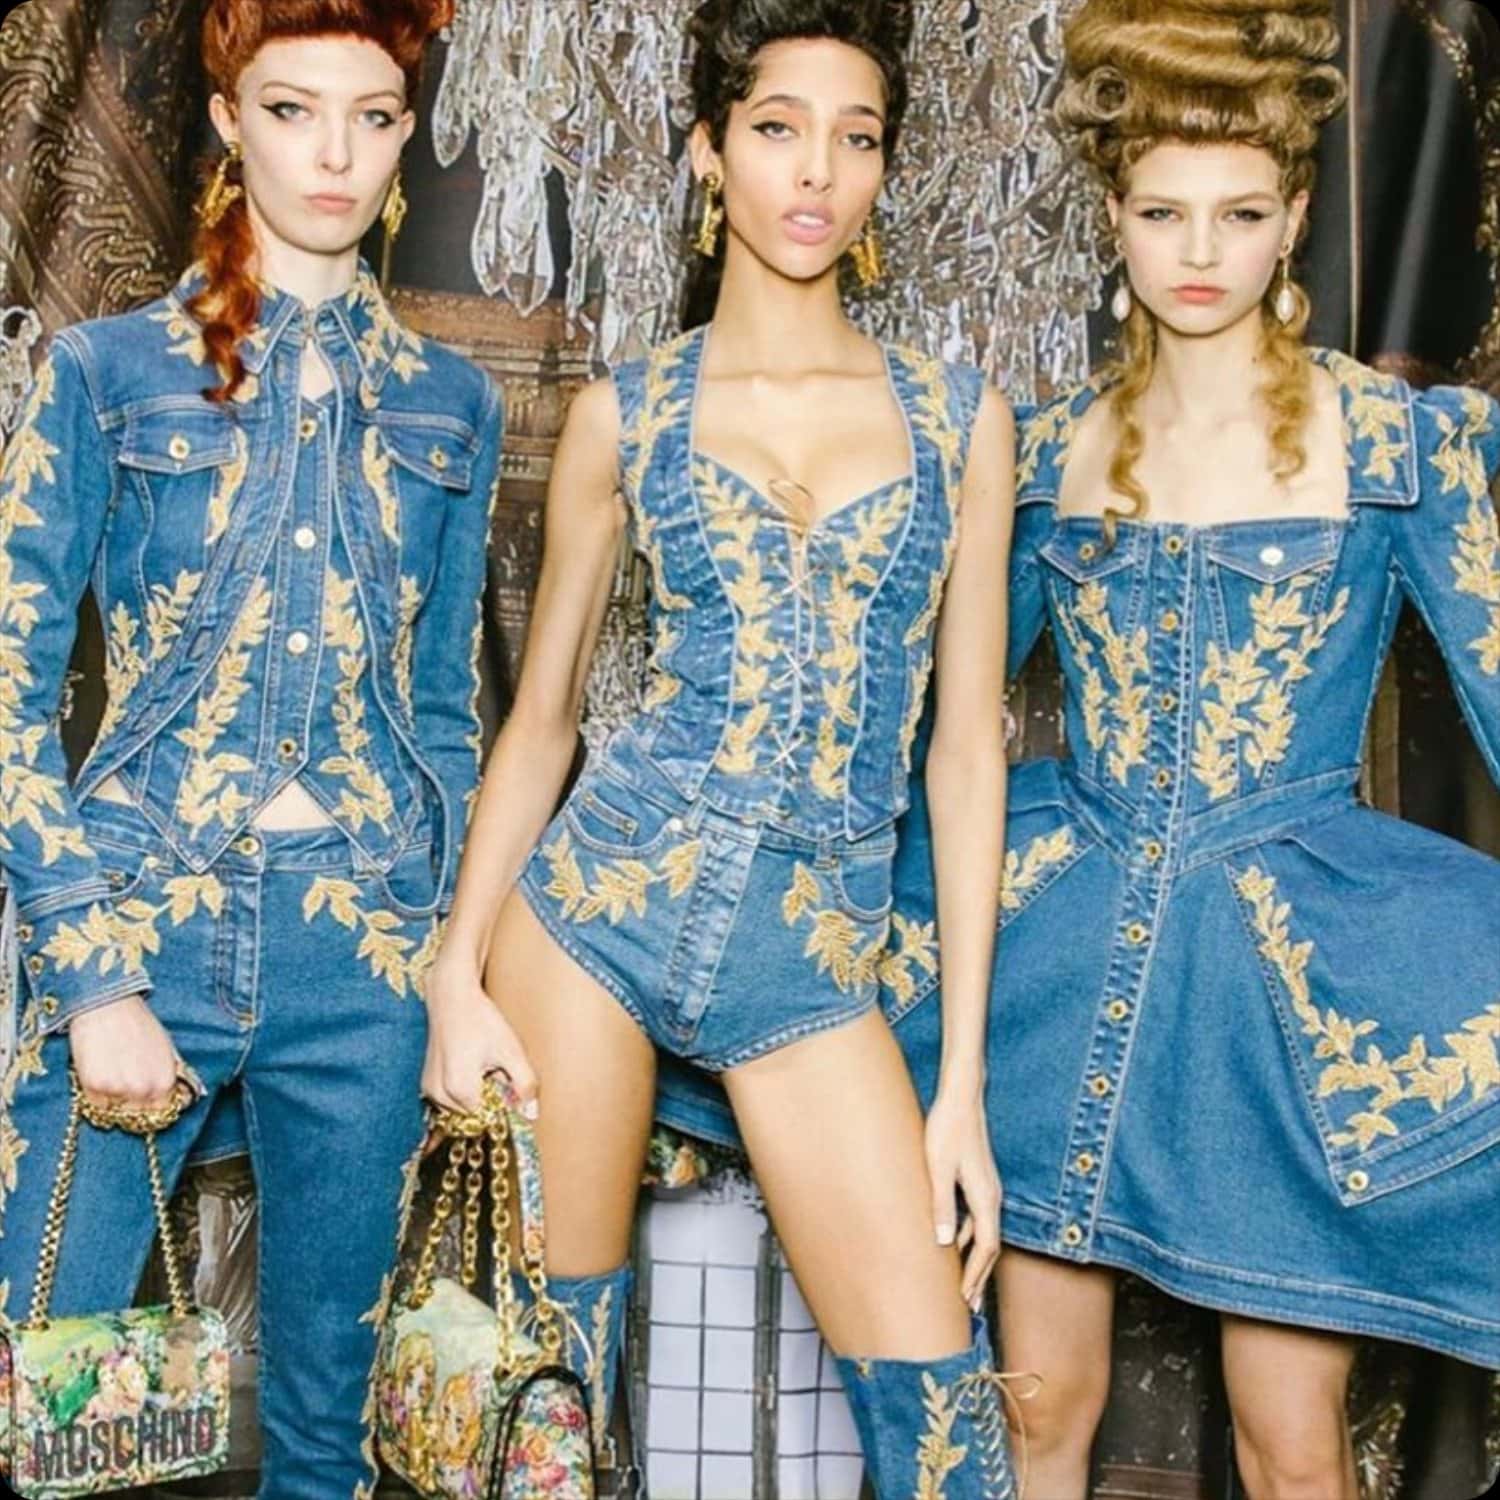 Moschino Fall-Winter 2020-2021 Milan Fashion Week Ready-to-Wear. Marie Antoinette - "Let them eat Moschino". RUNWAY MAGAZINE ® Collections. RUNWAY NOW / RUNWAY NEW